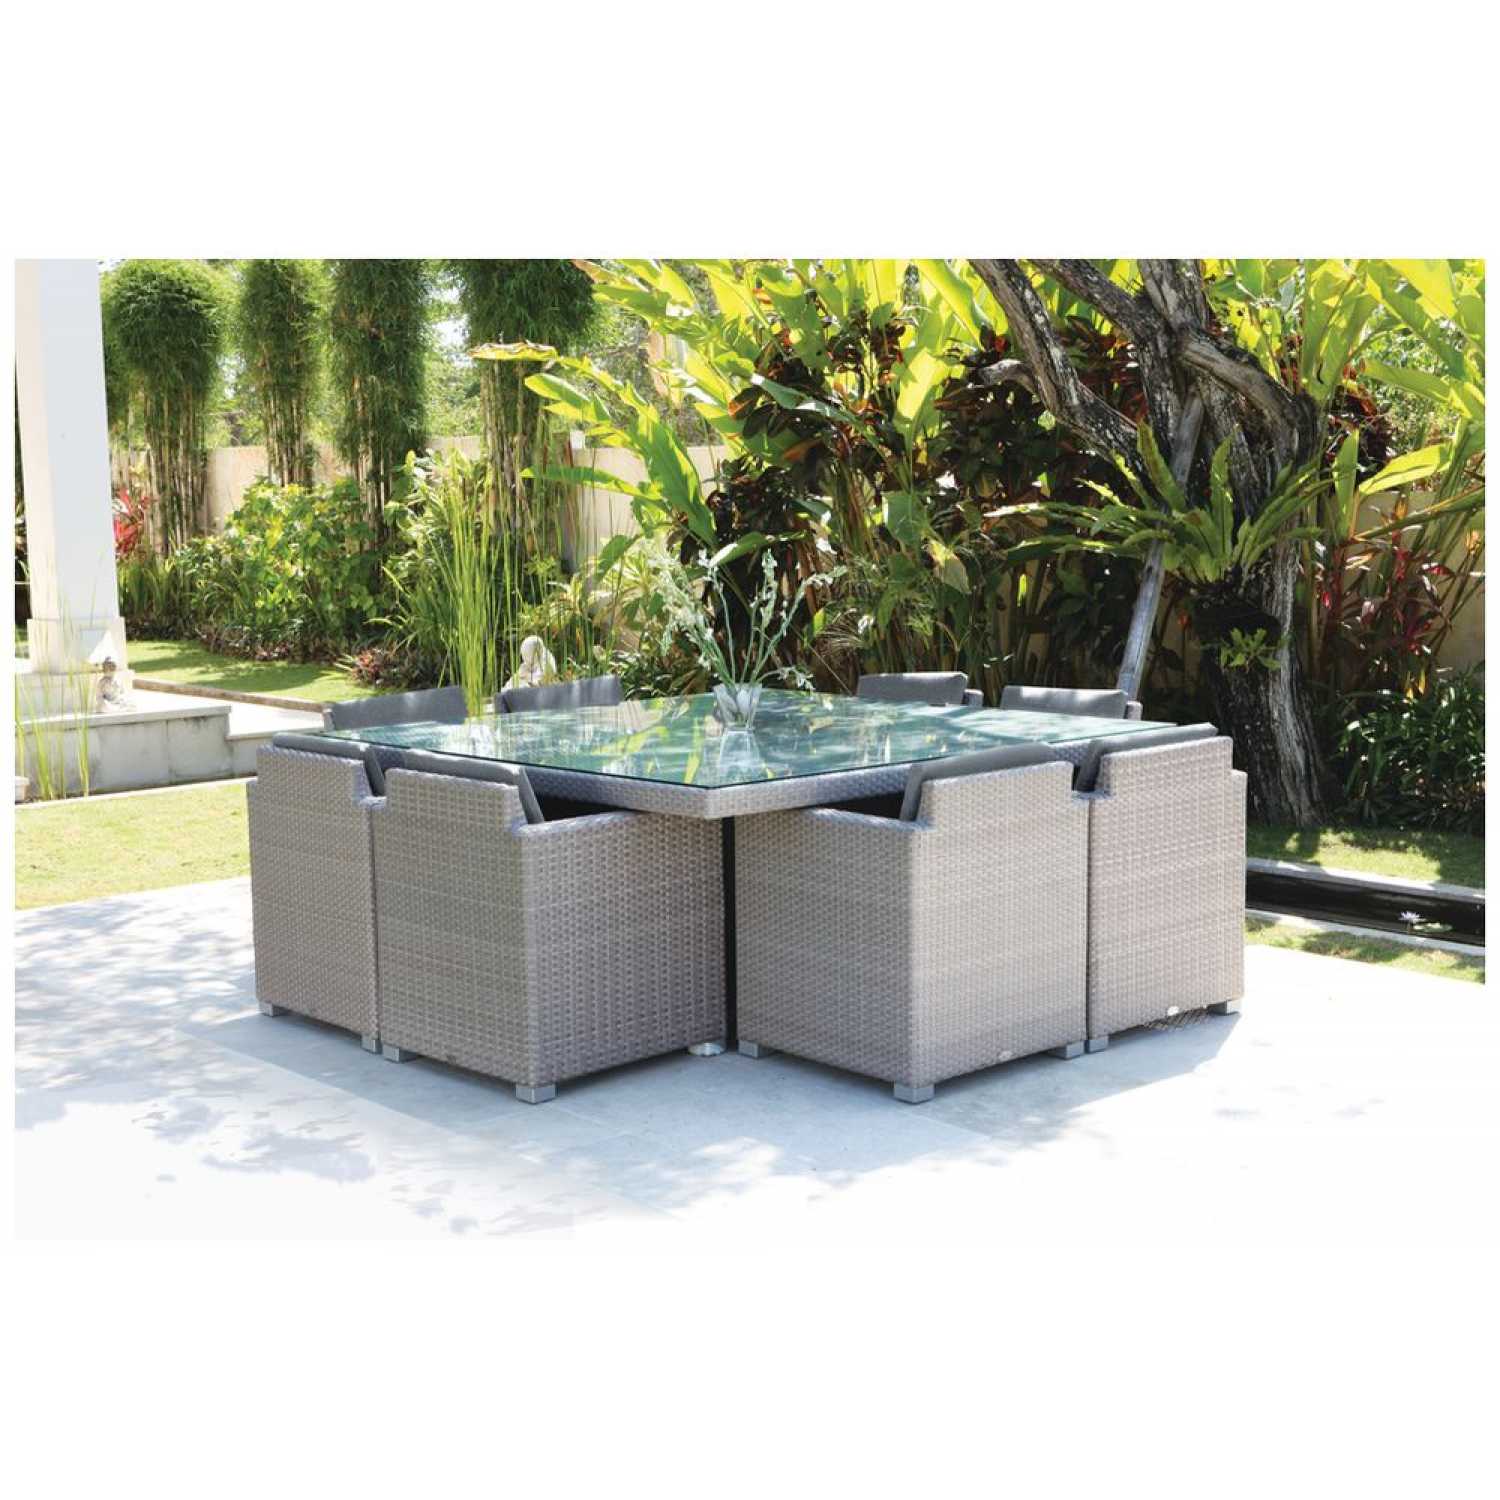 Pacific Silver Walnut Square Dining Table - PadioLiving - Pacific Silver Walnut Square Dining Table - Outdoor Dining Table - PadioLiving